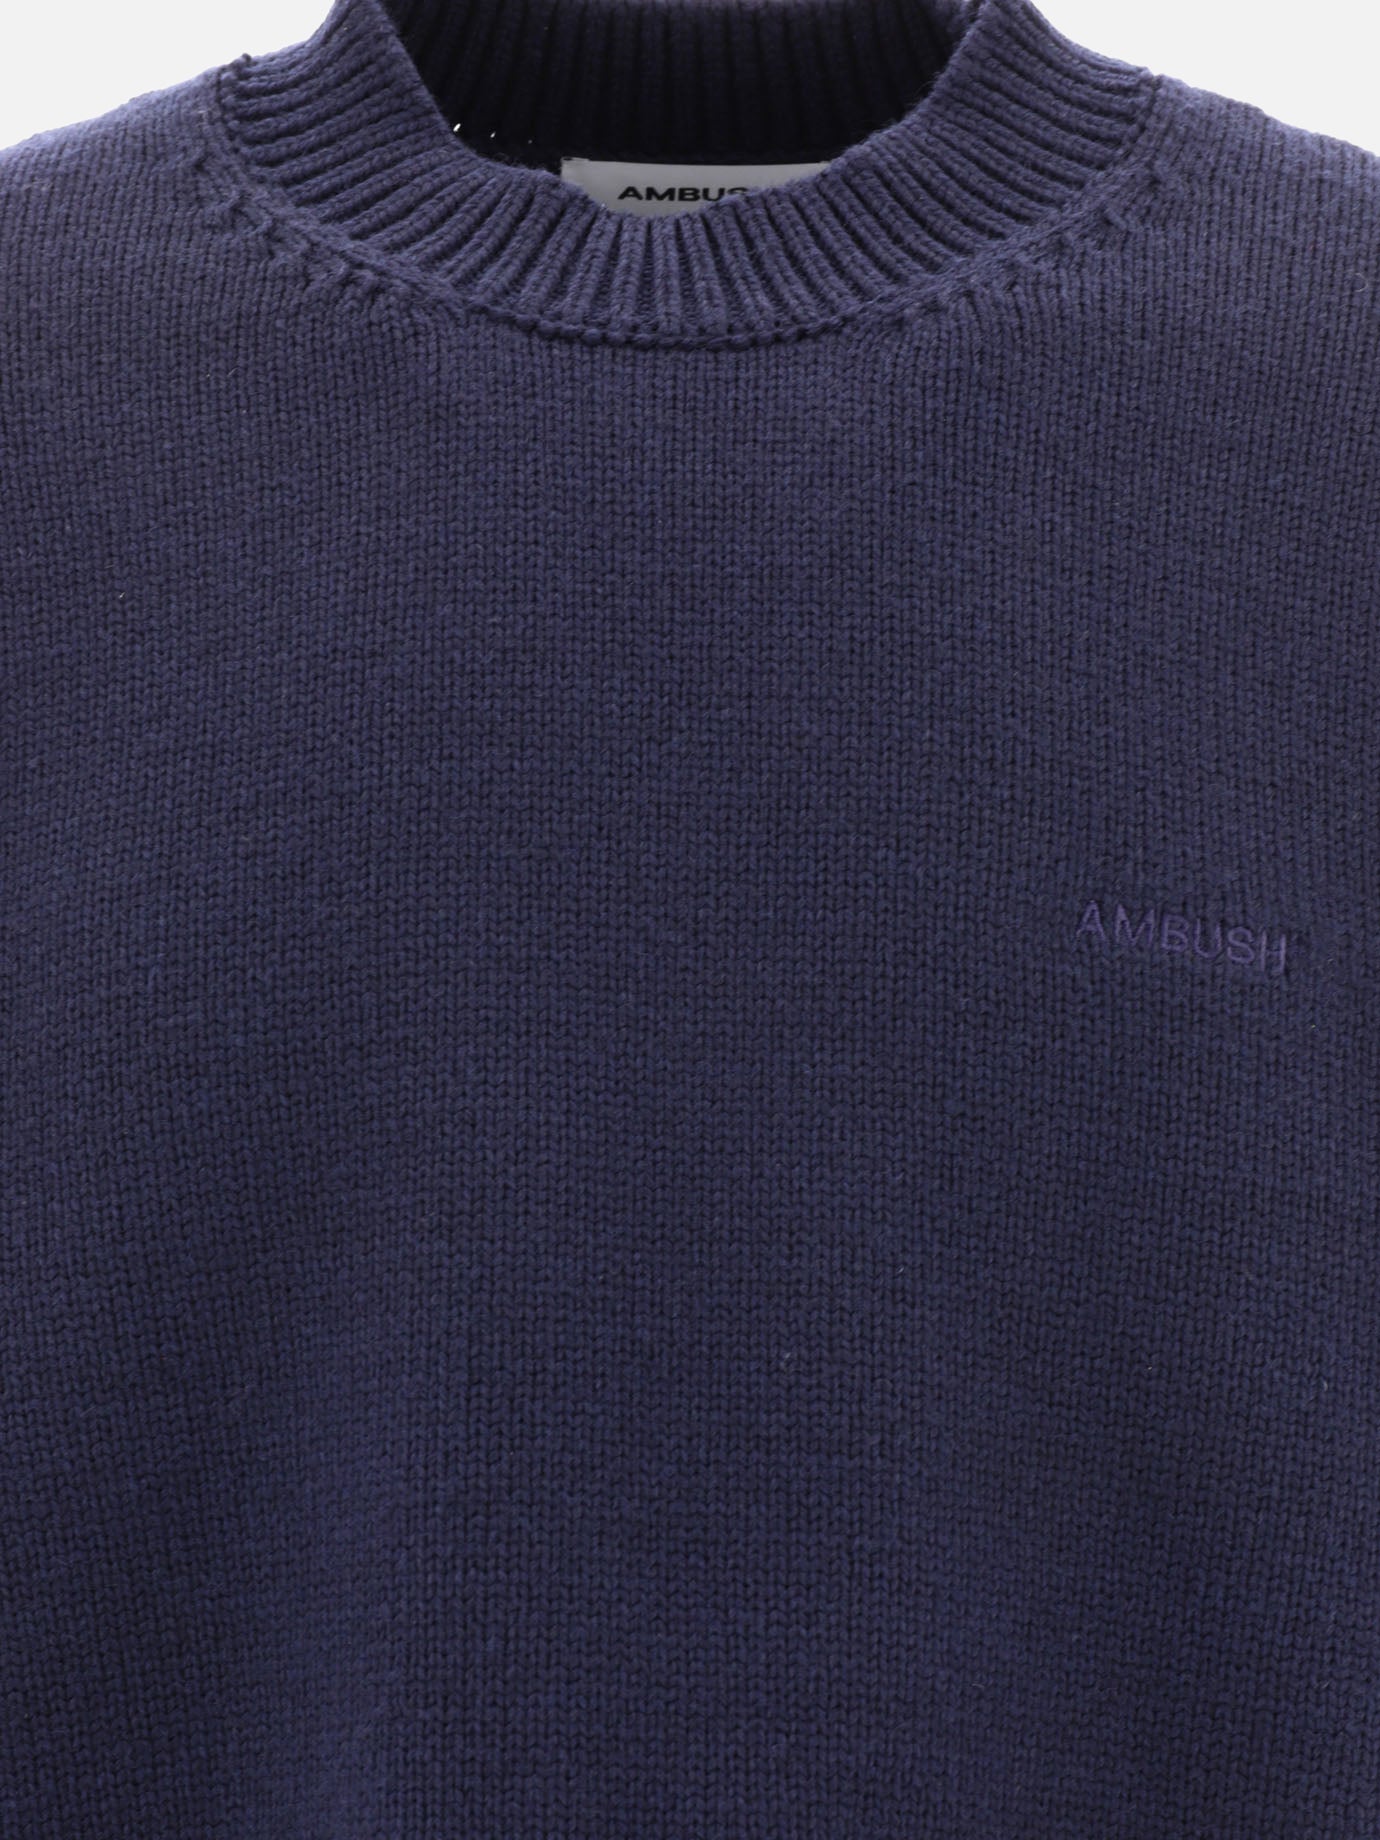 "FELTED KNIT" sweater